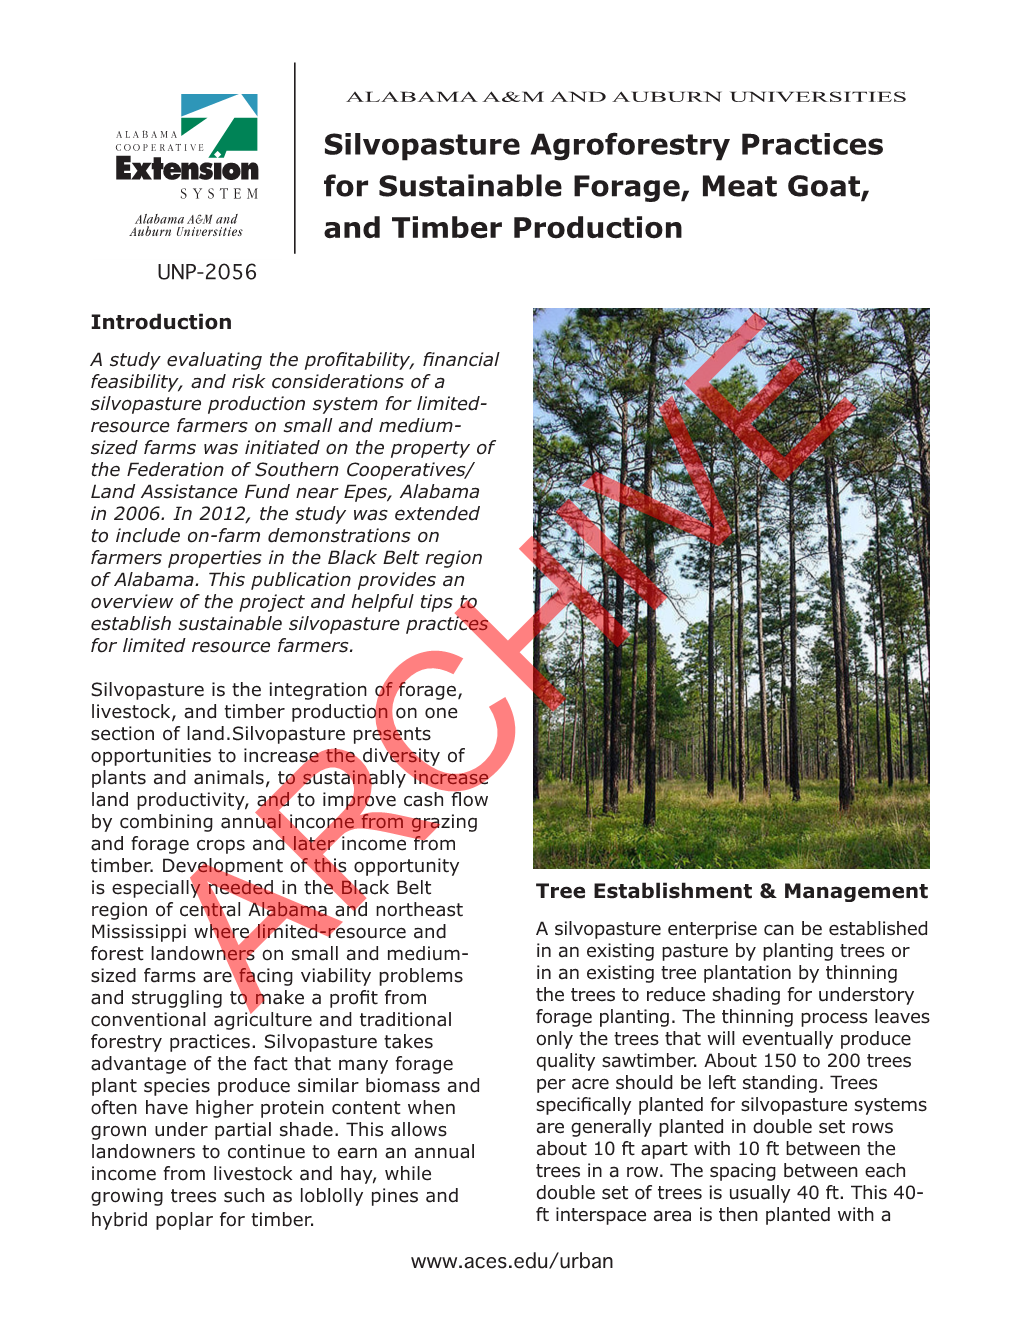 Silvopasture Agroforestry Practices for Sustainable Forage, Meat Goat, and Timber Production